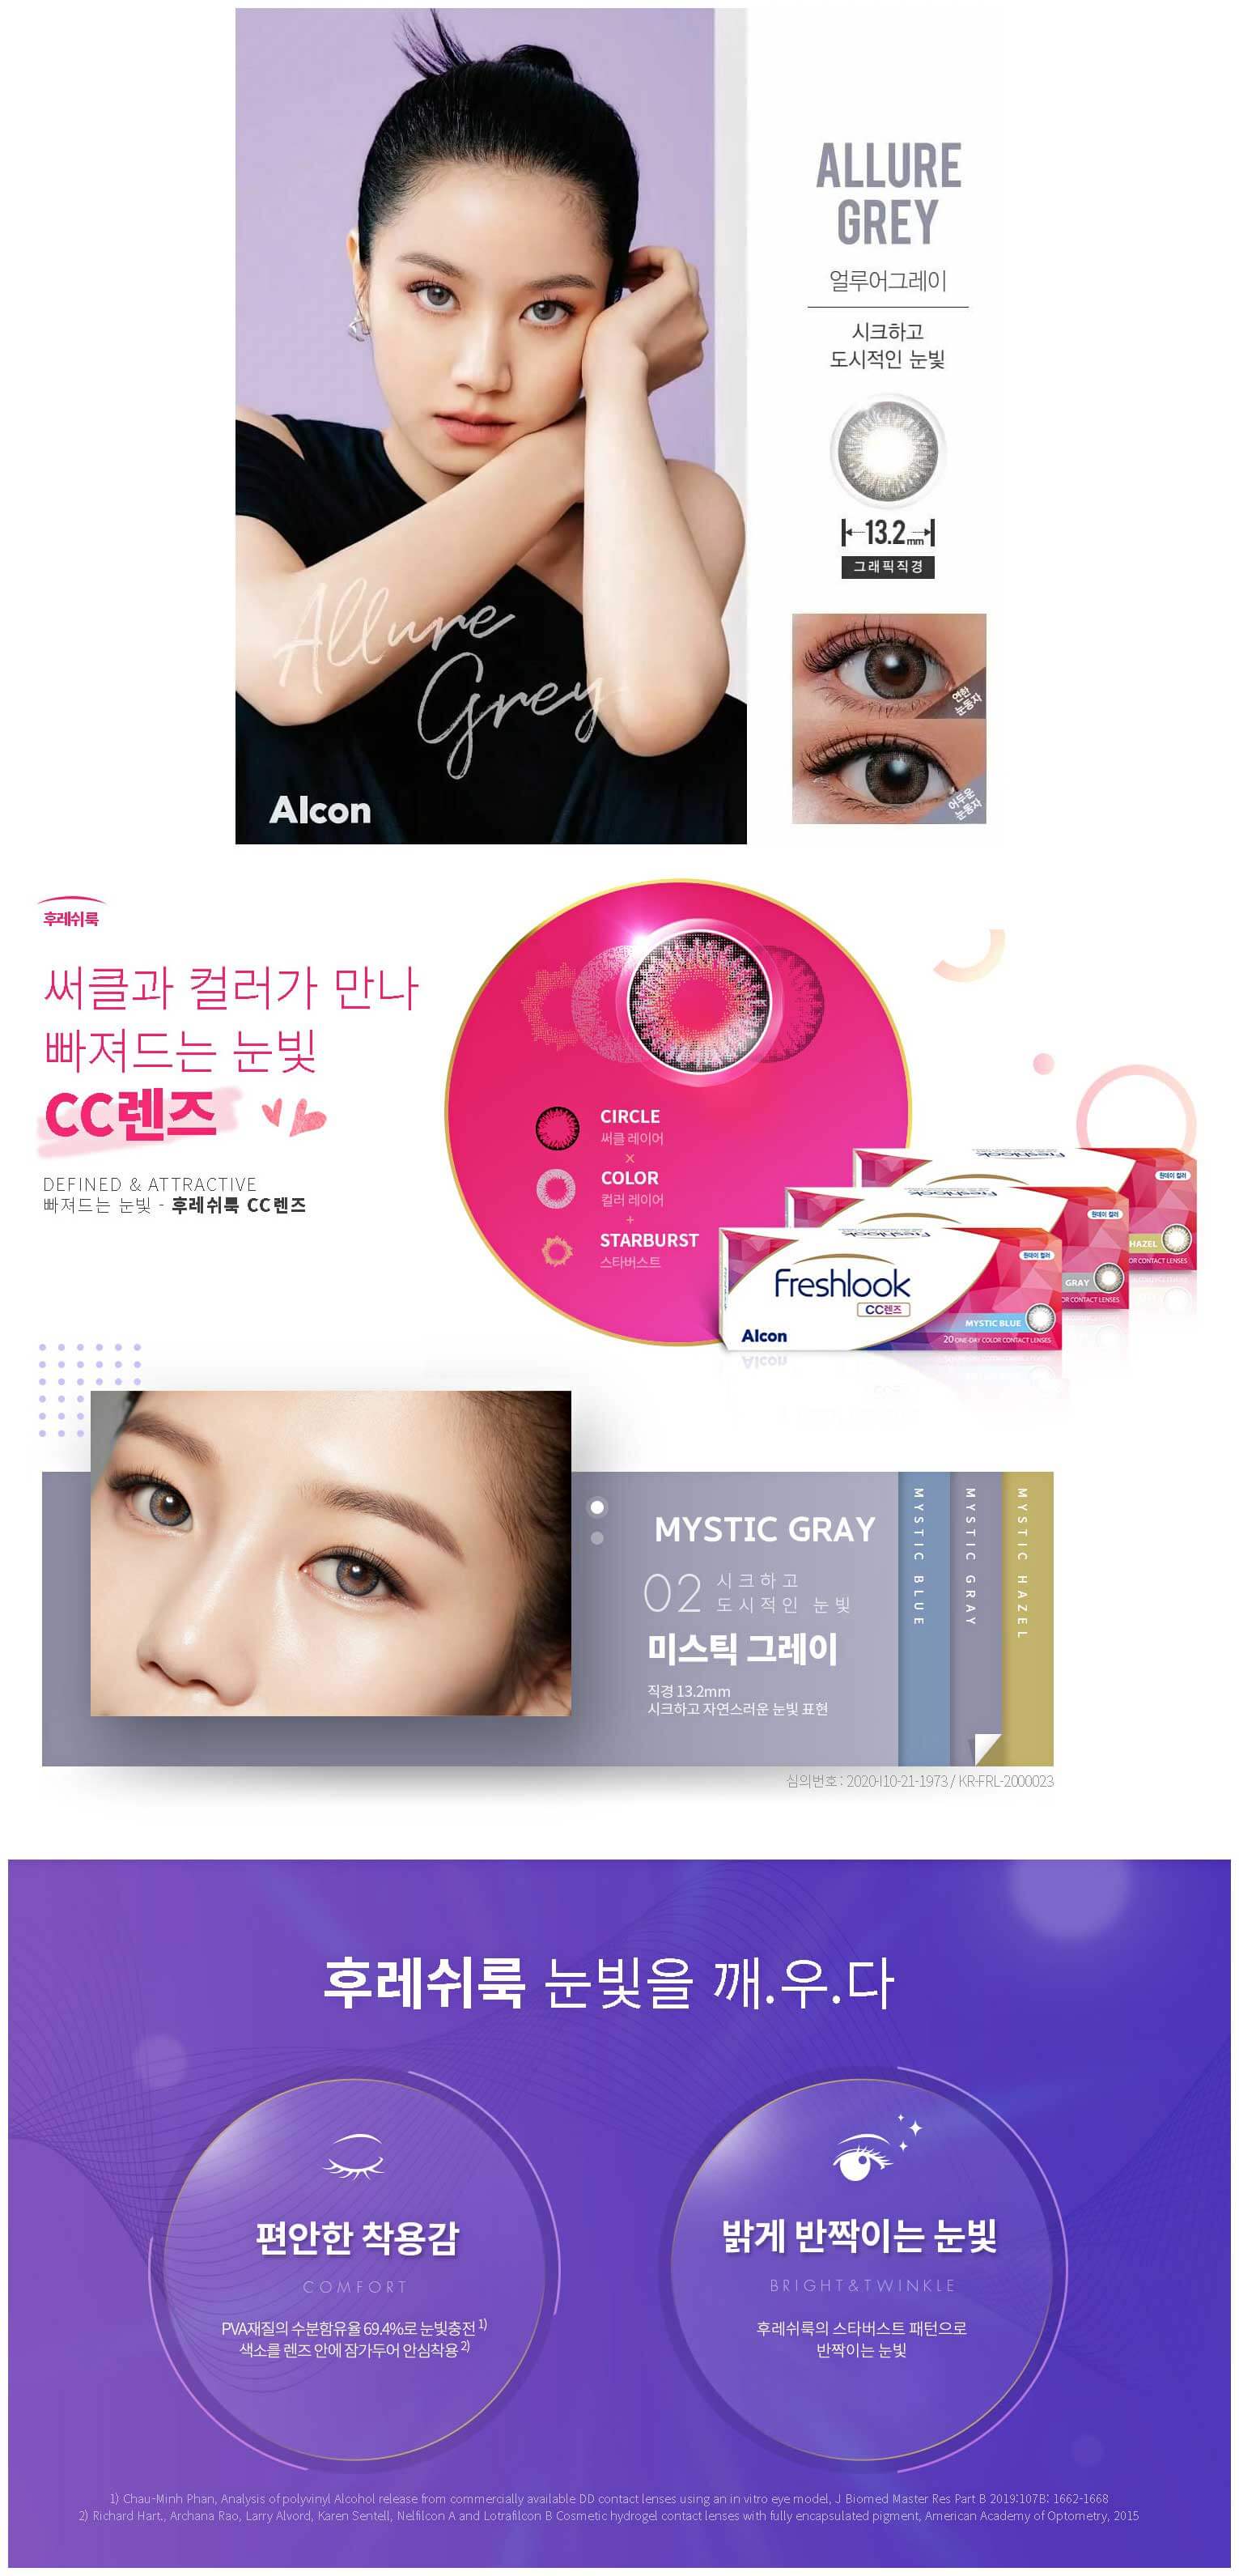 description-image-of-freshlook-one-day-cc-lens-allure-grey-30pcs-colored-contacts.jpg